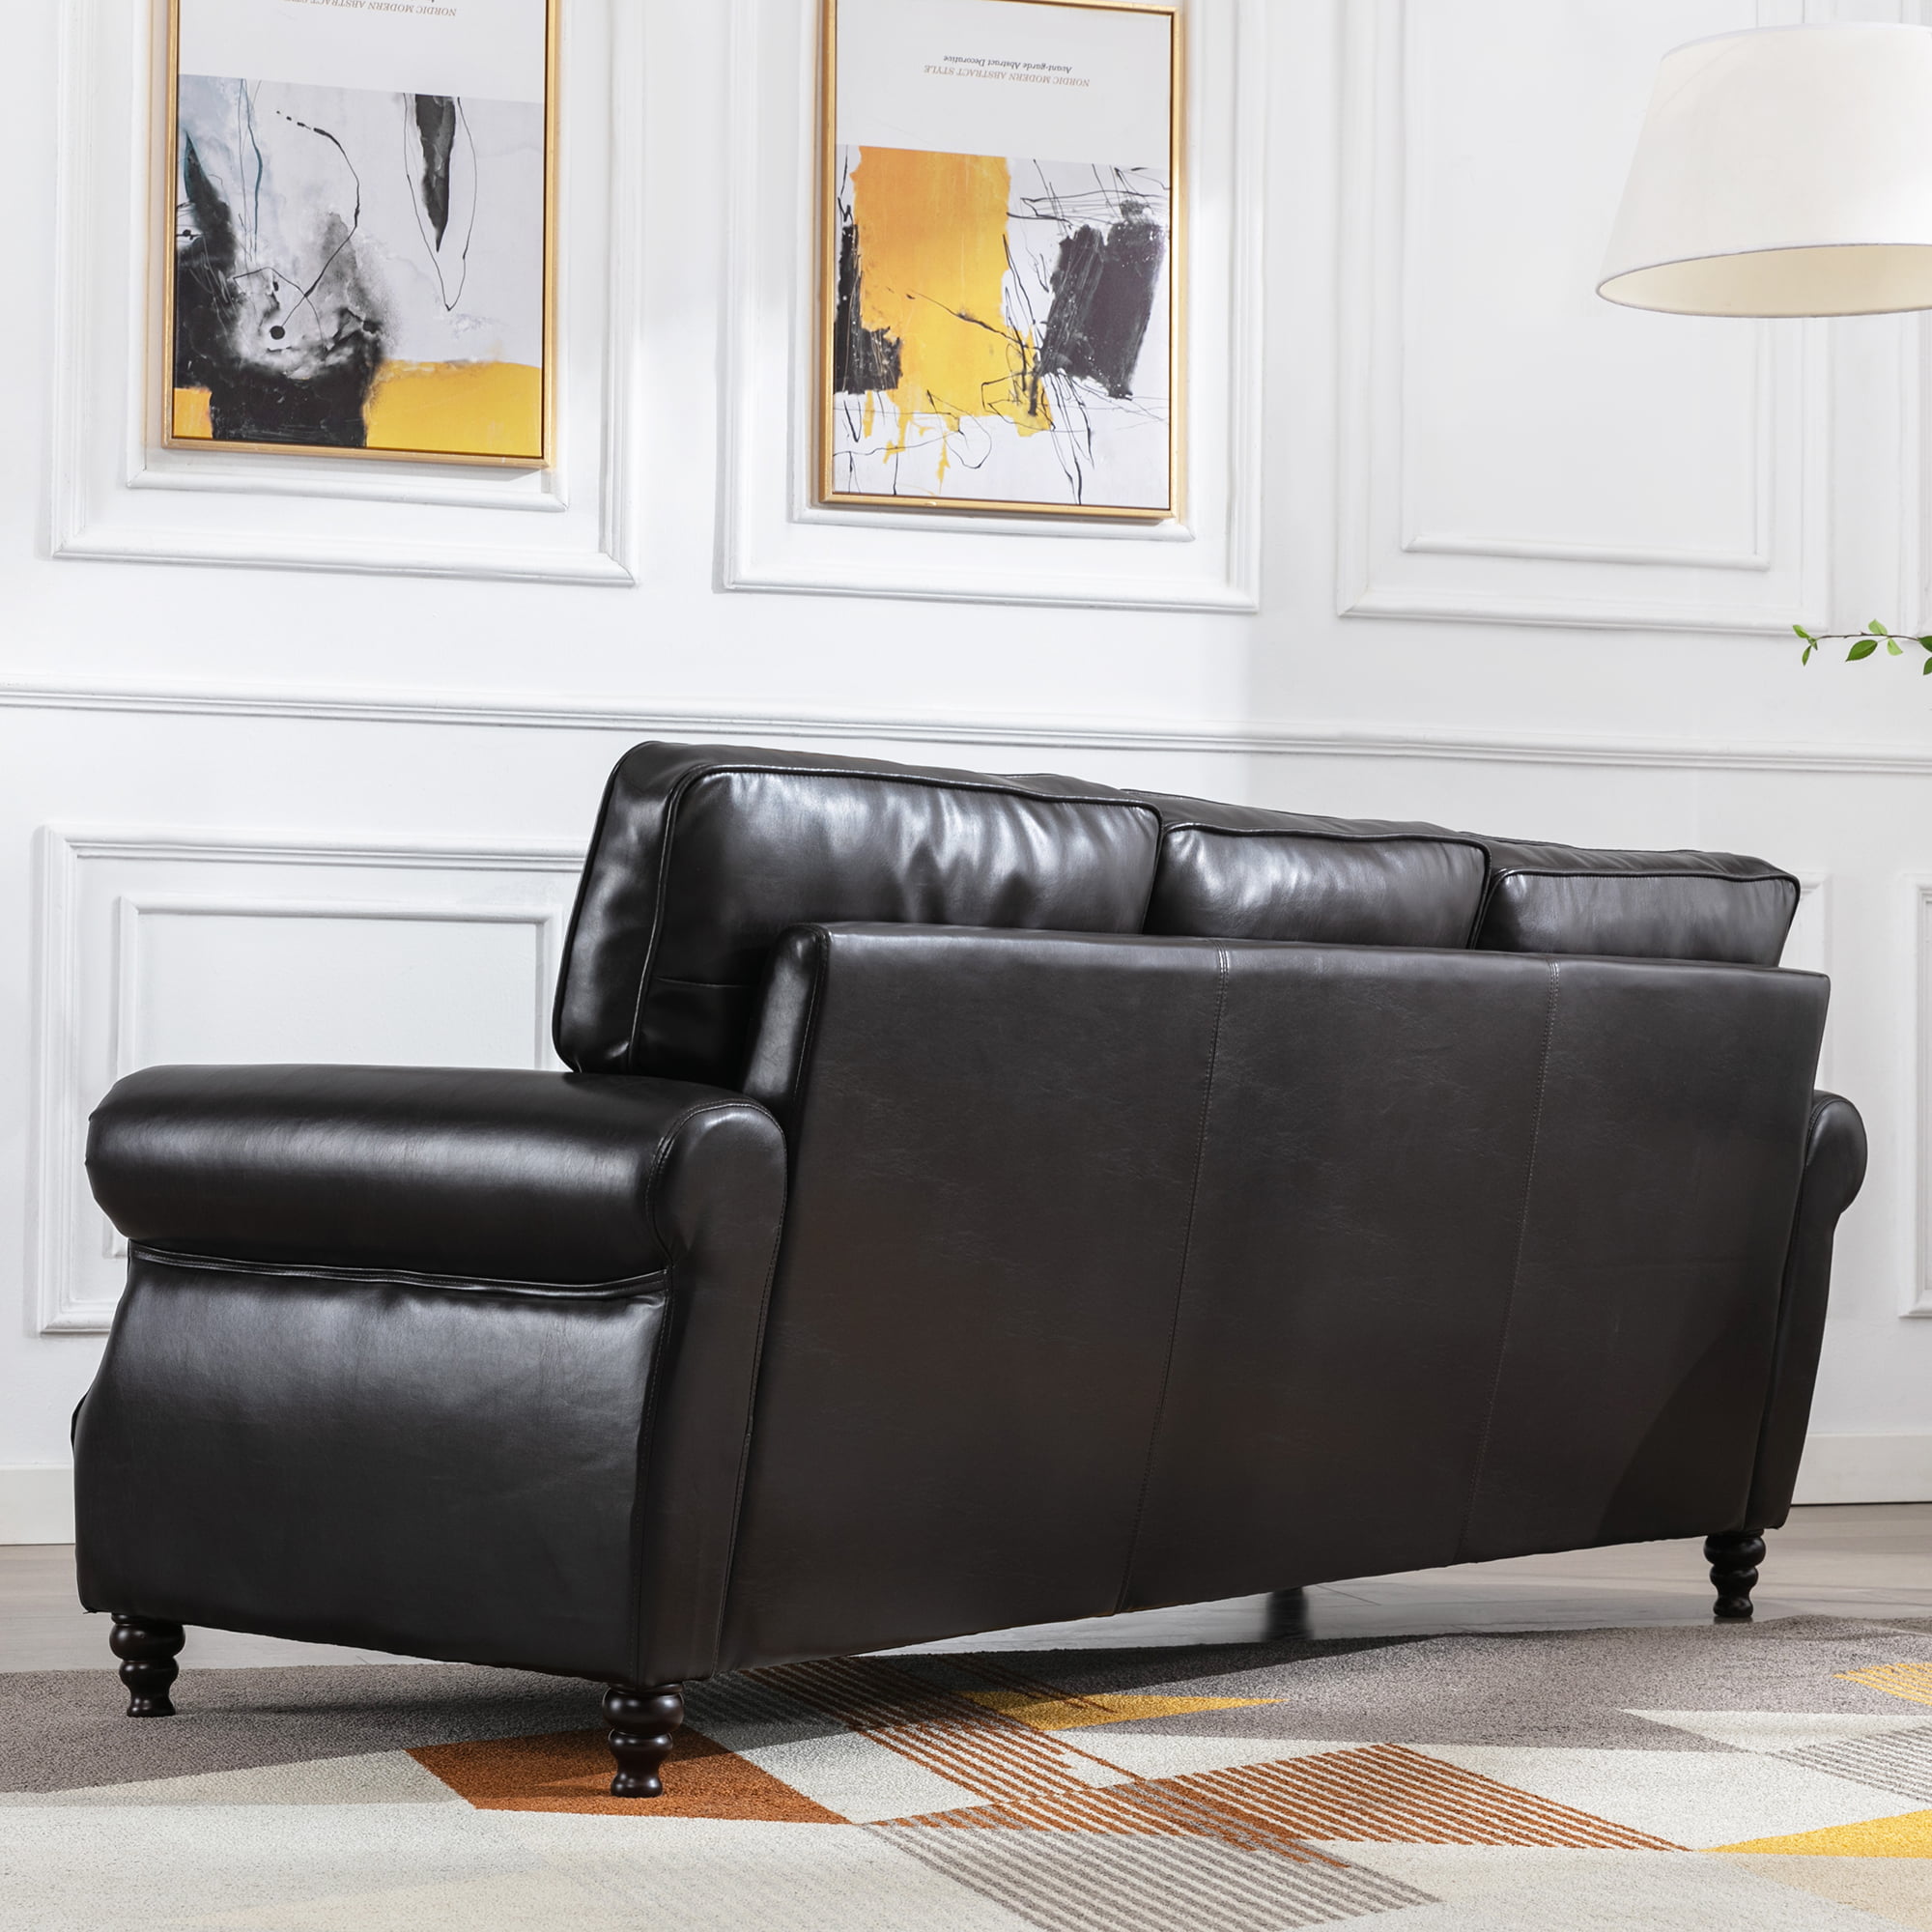 Dreamsir 80 Faux Leather Sofa Couch